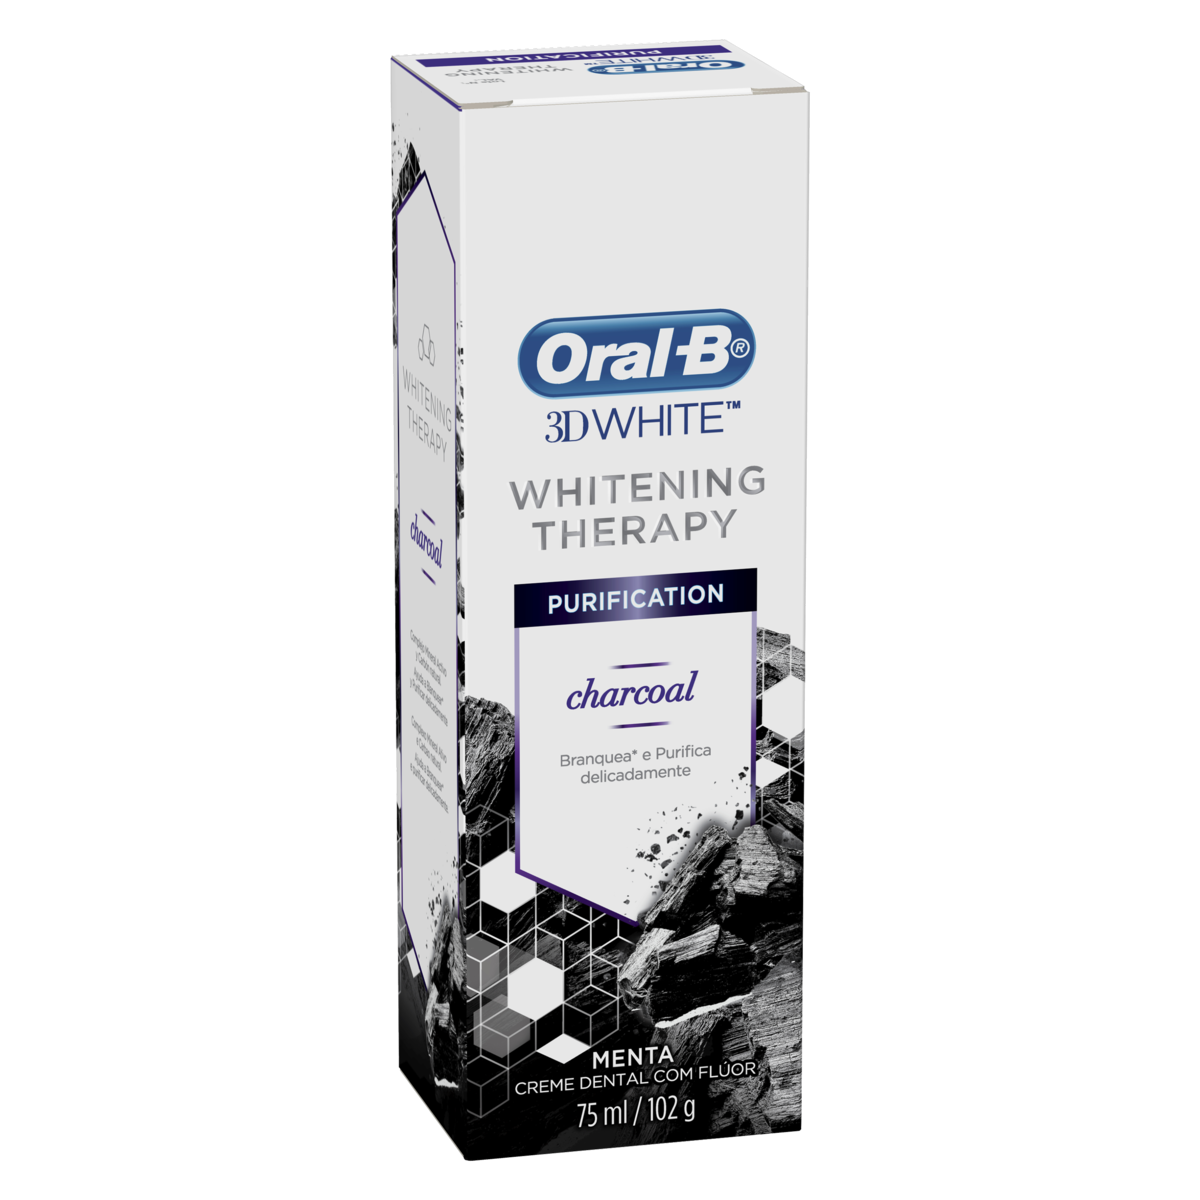 7500435142700 - CREME DENTAL PURIFICATION CHARCOAL MENTA ORAL-B 3D WHITE WHITENING THERAPY CAIXA 102G